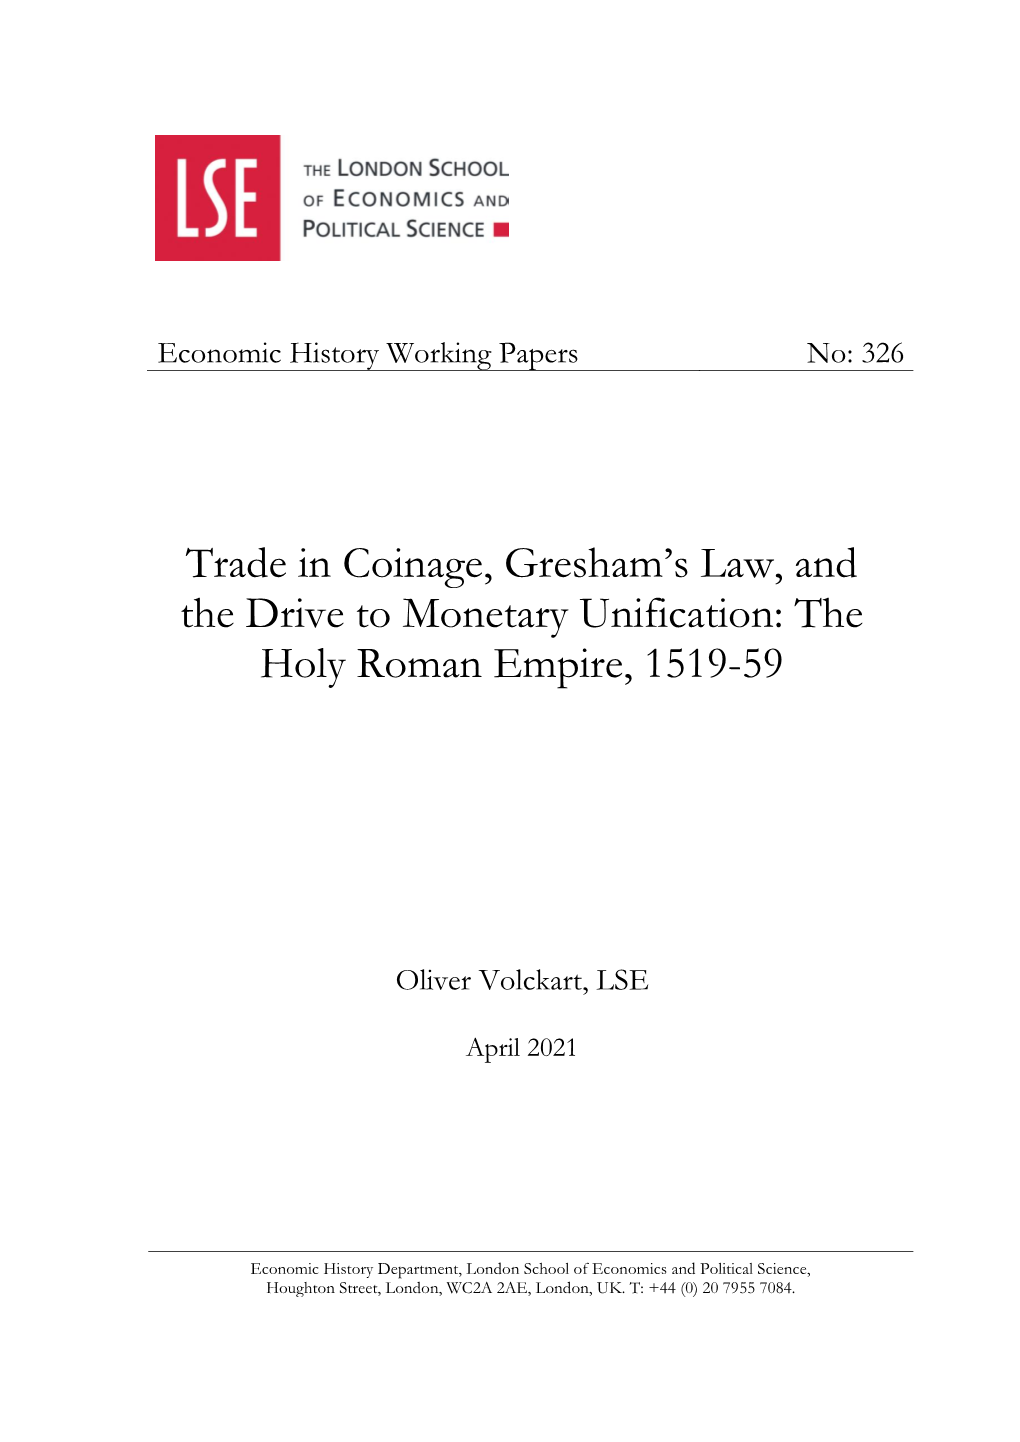 Trade in Coinage, Gresham's Law, and the Drive to Monetary Unification